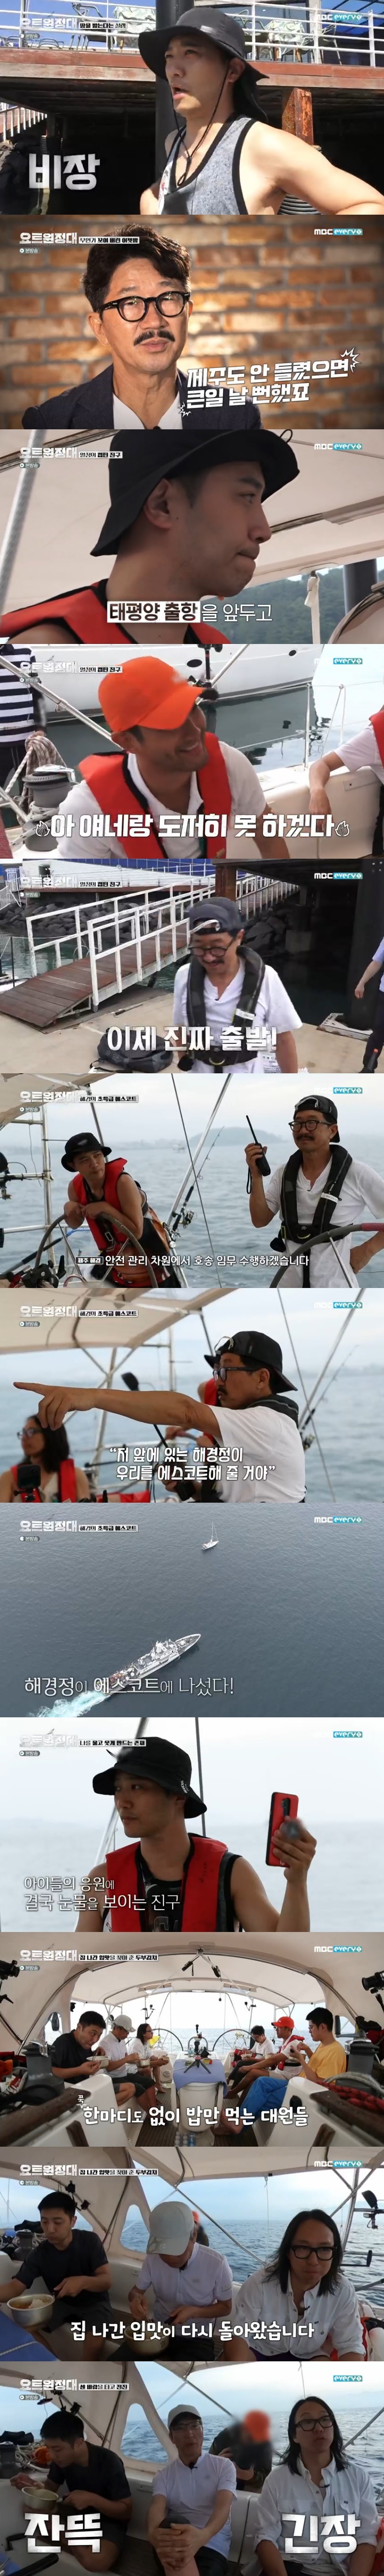 Seoul) = yacht expedition members were nervous.In MBC Everlon entertainment program yacht Expedition broadcasted on the afternoon of the 31st, Crewes such as Jin Goo, Choi Siwon, Chang Kiha, Song Ho Jun and Kim Seung-jin continued their voyage.They adapted to the yacht life at a rapid pace.The Embarkation for Cythera has caught the eye of eating comfortably on the yacht in 24 hours.Sea captain Kim Seung-jin was proud to be adapting quickly, saying, I think everyone will be okay tomorrow.Members stopped at Jeju Island because they had to report their departure to go to South Pacific Ocean South Cross.Now I laughed, feeling land sickness in Jeju Island, not above yacht; after the departure report, I made a flag of yacht Expedition only.After the yacht inspection, the crew started a full-scale adventure.But the crews who have become more thoughtful ahead of Pacific Ocean The Embarkation for Cythera.Kim Seung-jin shouted the fight, saying, I want you to enjoy your own sea enough. Lets enjoy this voyage.Several members laughed at the soulless answer, and Sea captain confessed that he was worried that someone would give up on Jeju Island.At this, Choi Siwon joked, Sea captain wanted to give up on us. Crewes, who were ready for a new round, escaped Jeju Island Dodu Port.I ask you a lot of support so that you can get back safely, Choi Siwon said, looking at the camera, why is the ship more comfortable than the land?, which made the crew laugh.Then suddenly, there was a problem: the knot was wrong. Choi Siwon was surprised by Sea captains call.Among them, I heard the radio call for the yacht of the expedition. Everyone was nervous about the communication.Kim Seung-jin said: We will be on a convoy mission on a safety management level.I was escorted by Min Hae-kyung in preparation for the situation I did not know, he said. Min Hae-kyung will escort us.The members, impressed by the super-class escort, thanked Min Hae-kyung.He also made his last call at home: Choi Siwon made a video call to his nephew, who ended up tearing at the cheering of the children, Dad, cheer up.The yacht expedition, which gained strength from the family, sailed vigorously out of the territorial waters and toward the sea.Chang Kiha prepared tofu kimchi as a dish for the crew; helped by Choi Siwon, with rave reviews such as Fried Kimchi is fantastic, Its delicious? and Its good to cook.The crew ate nothing but food. As they gradually adjusted to their yacht life, their appetites returned.Among them, Sea captain Kim Seung-jin predicted, I think Sen Wind will come in two days.I come up from the south-west, so I have to go down from Jeju Island and go west, he said.The Wind is not the original navigation route, but the Wind is going to enter the planned route south. Kim Seung-jin said, I will experience it tomorrow.You have to be nervous for three days. There is nothing to be afraid of when you enter Pacific Ocean, he said. You have to be careful about small islands and these things. Crewes were nervous.Next weeks trailer was filled with an unusual atmosphere: Sea captain informed me that the yacht was getting cold.It was a situation where we had to pump out the water that was filled with the cabin floor. It is noteworthy how the yacht expedition crew will overcome the crisis.